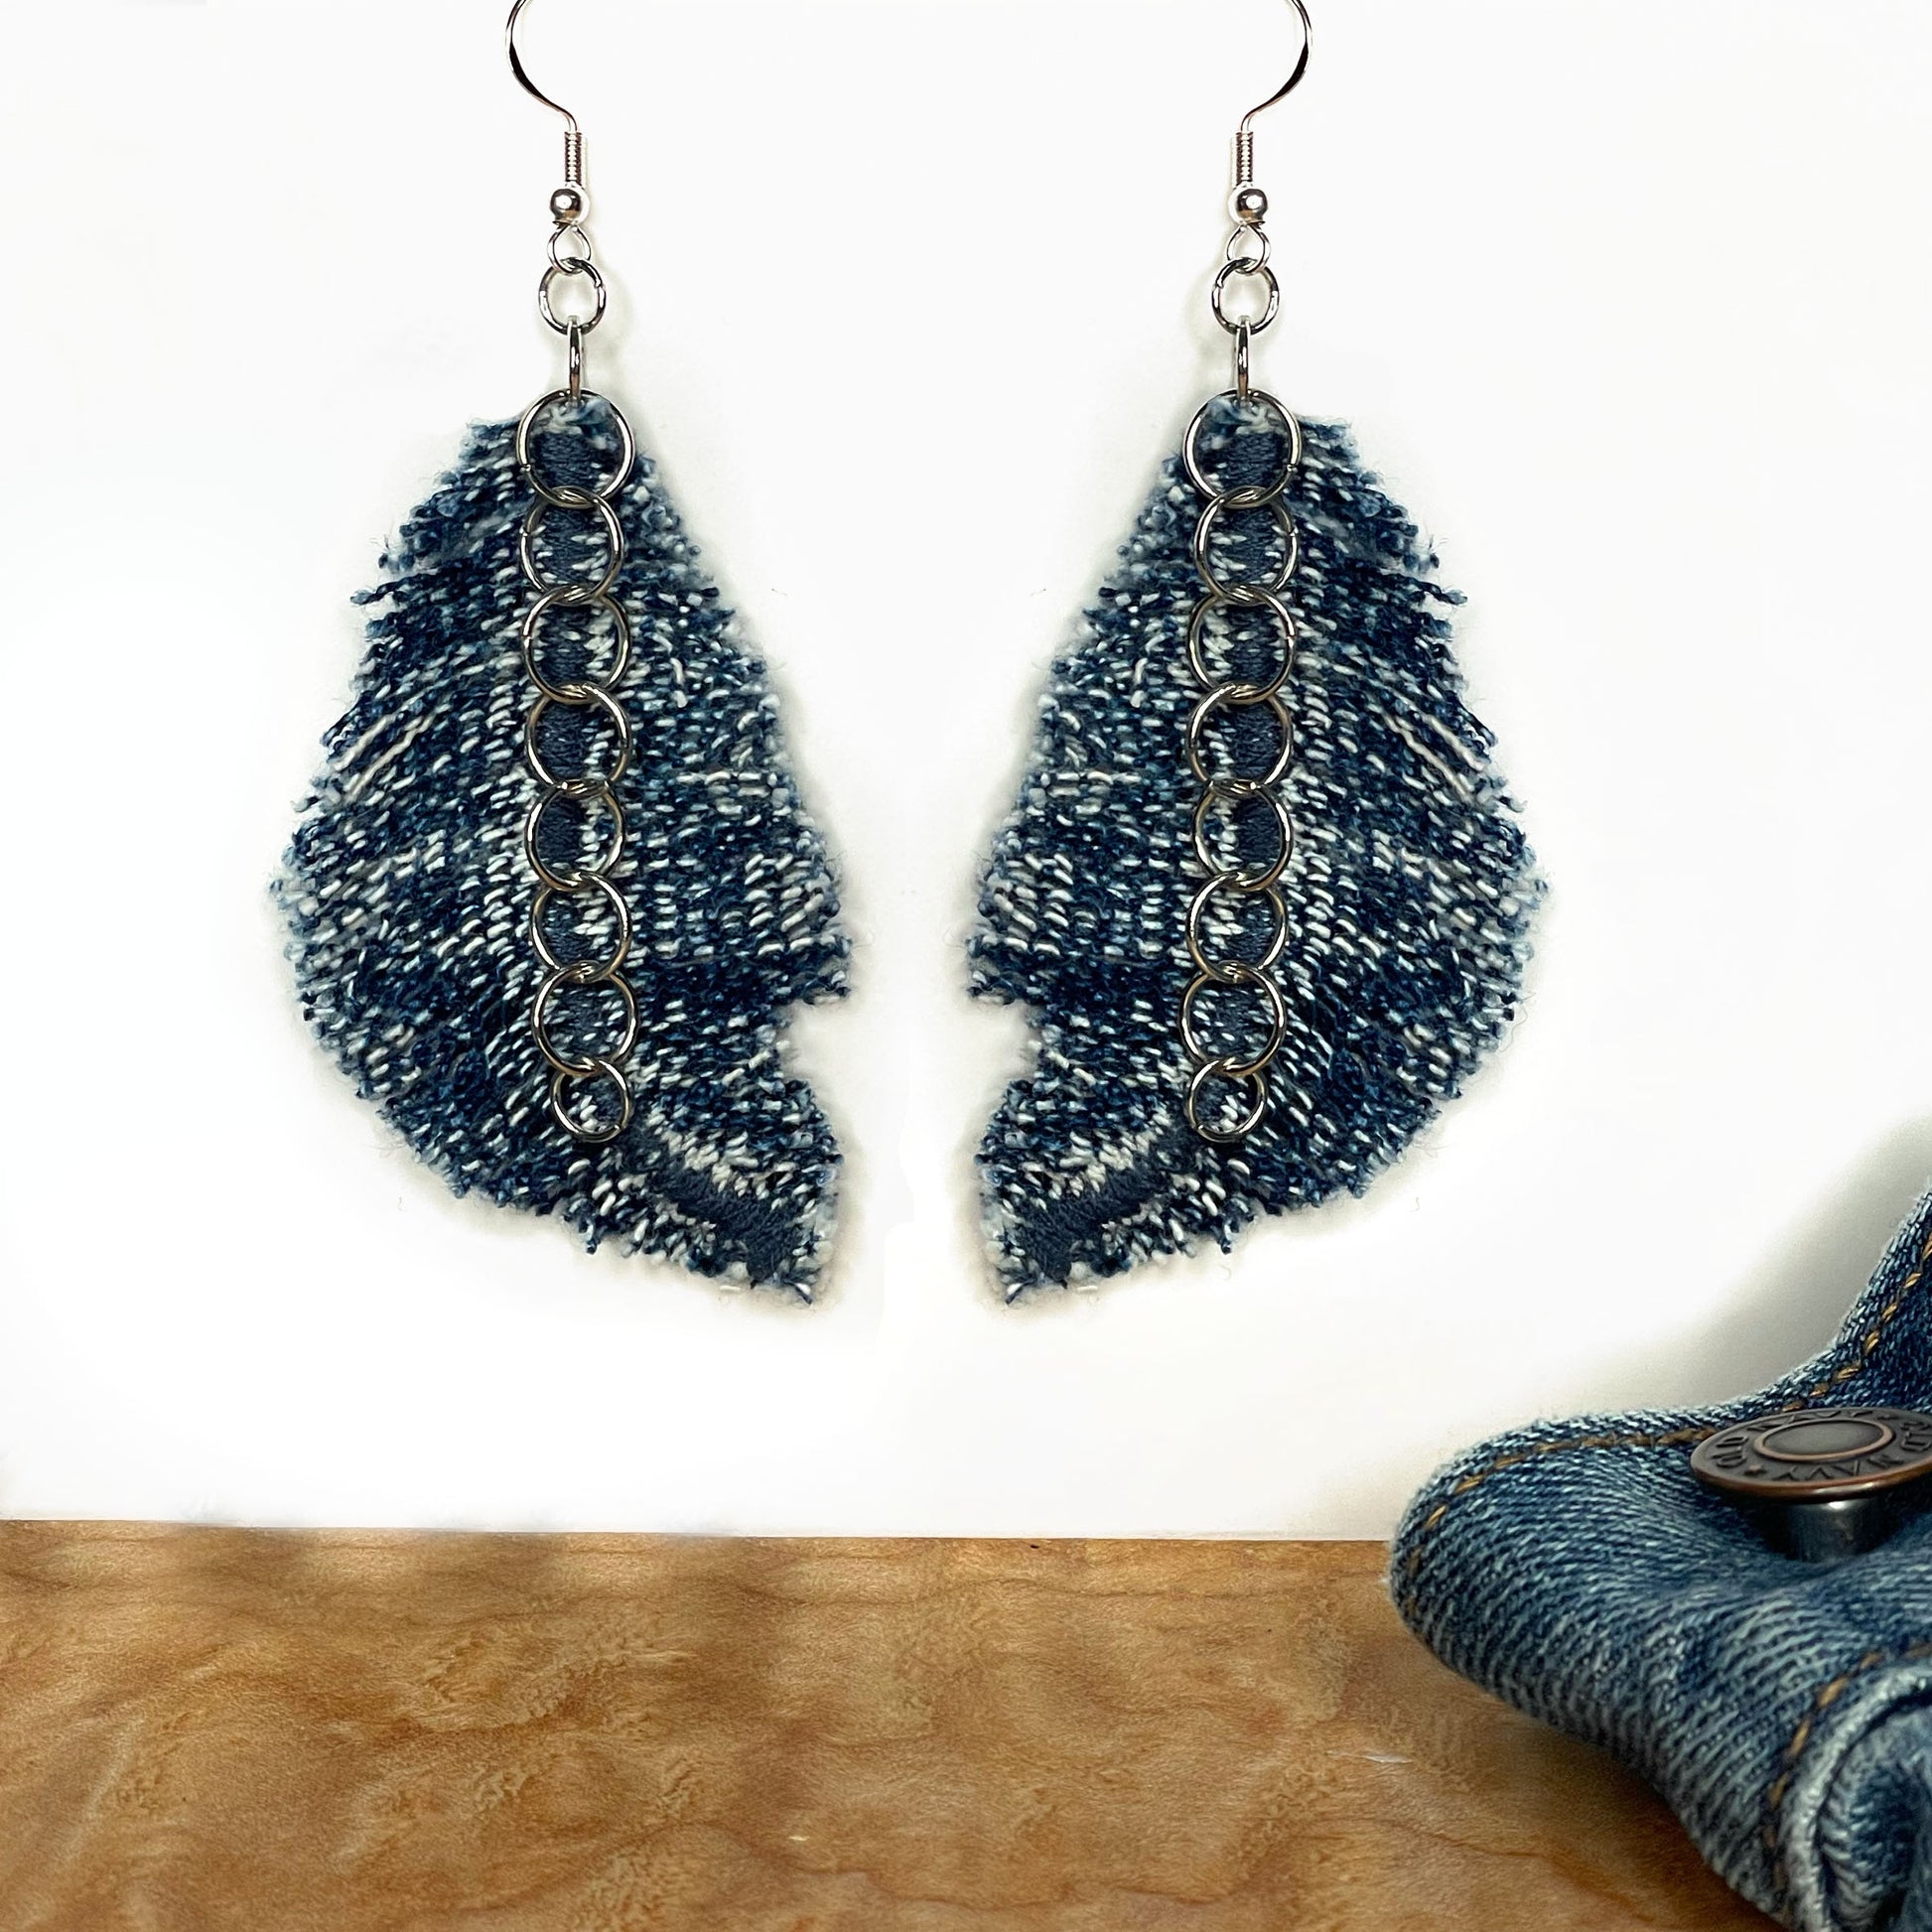 Denim Feather Earring, Boho style Jewelry from recycled denim. Handmade unique earrings from local brookln designers.